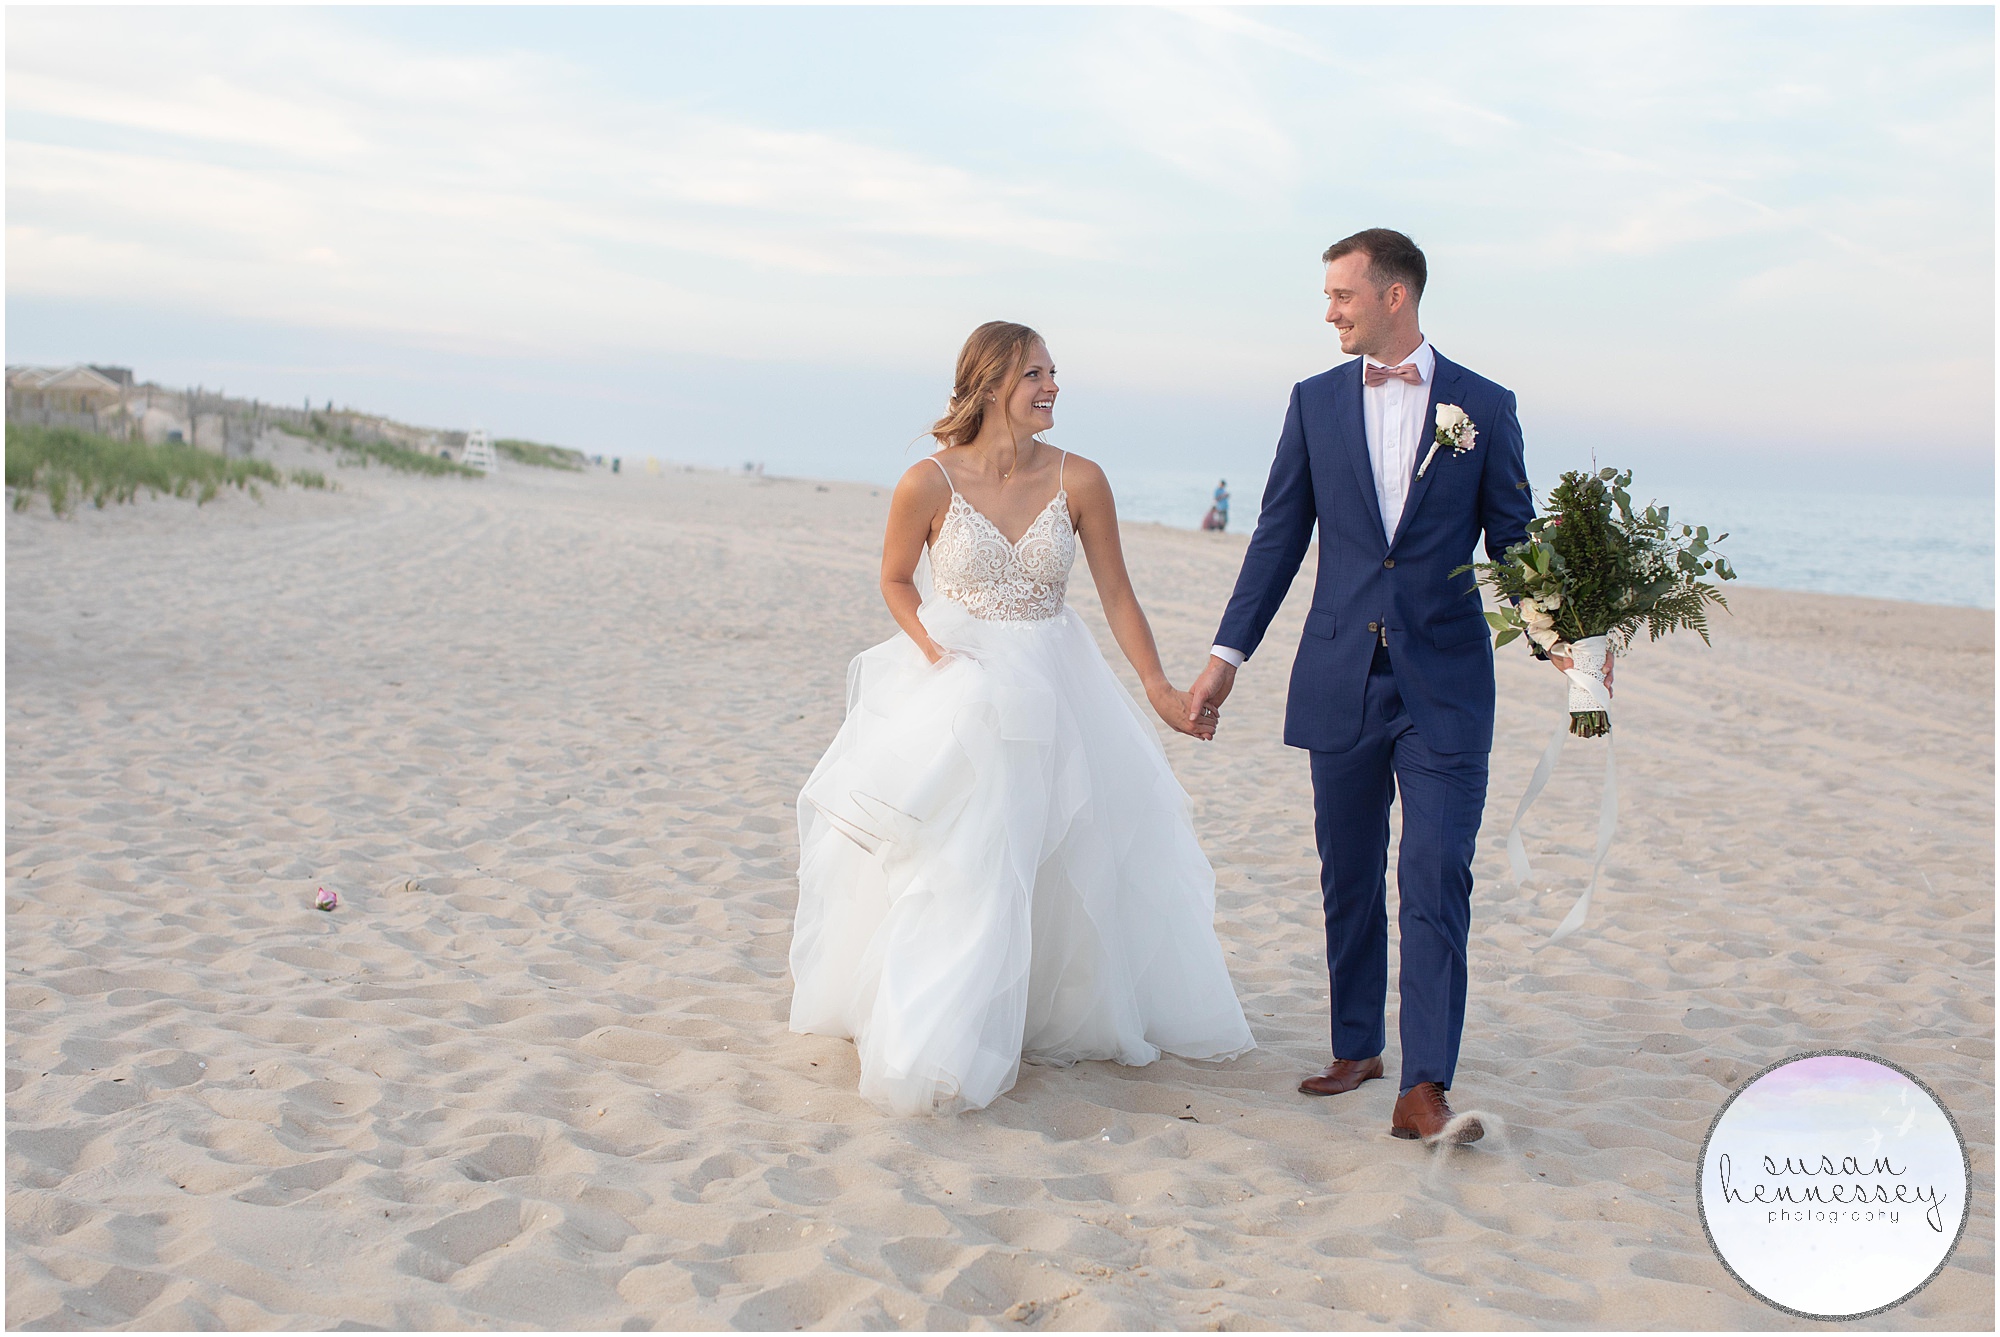 A couple laughs in the sand at Summer microwedding